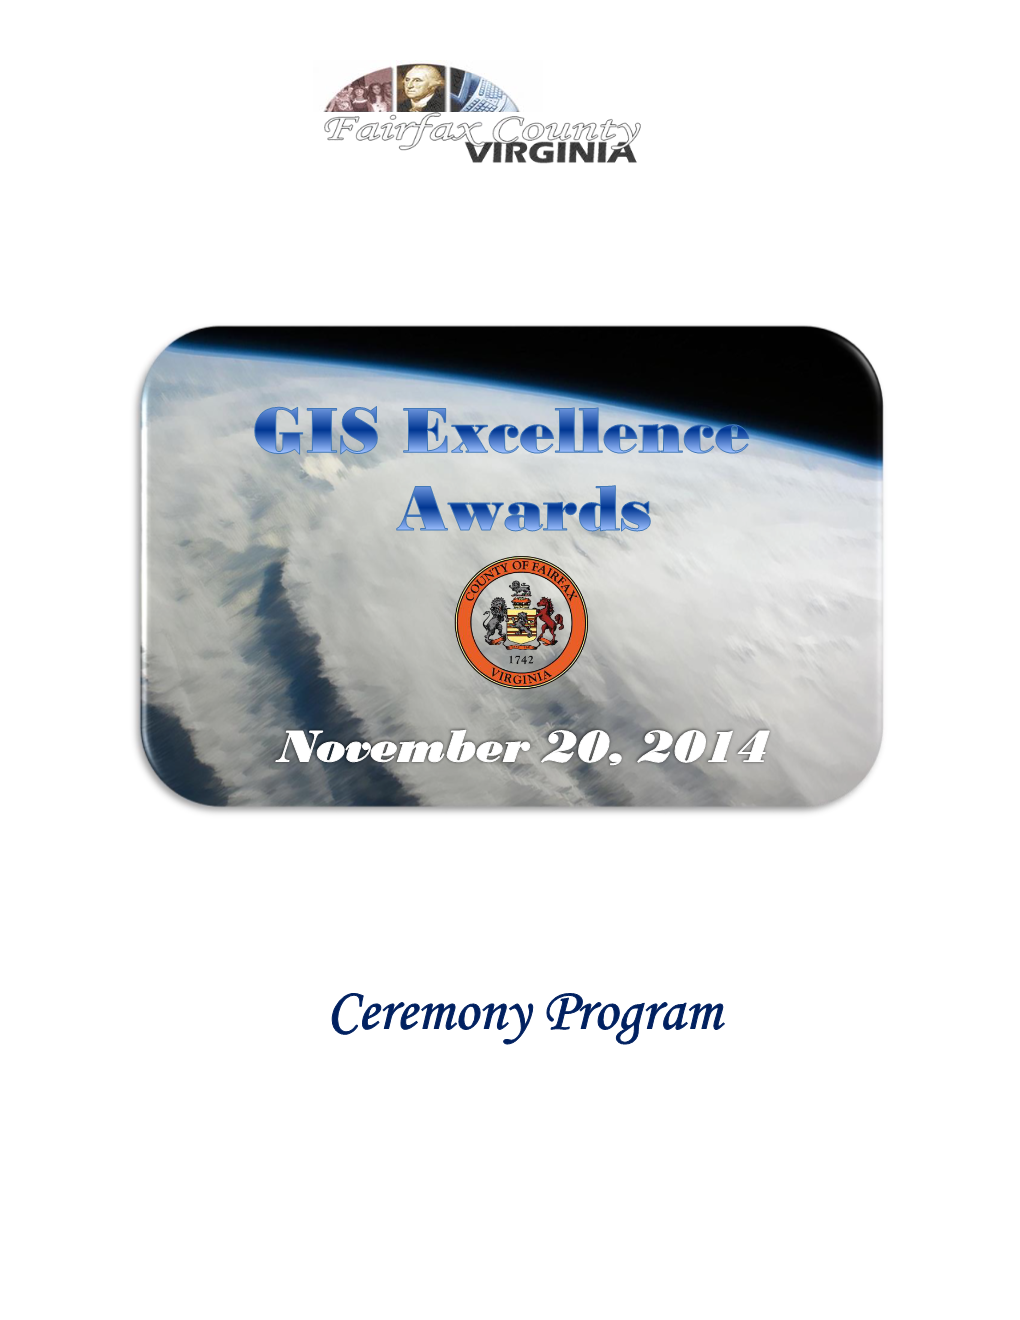 GIS Excellence Awards and Posted in the Awards Gallery